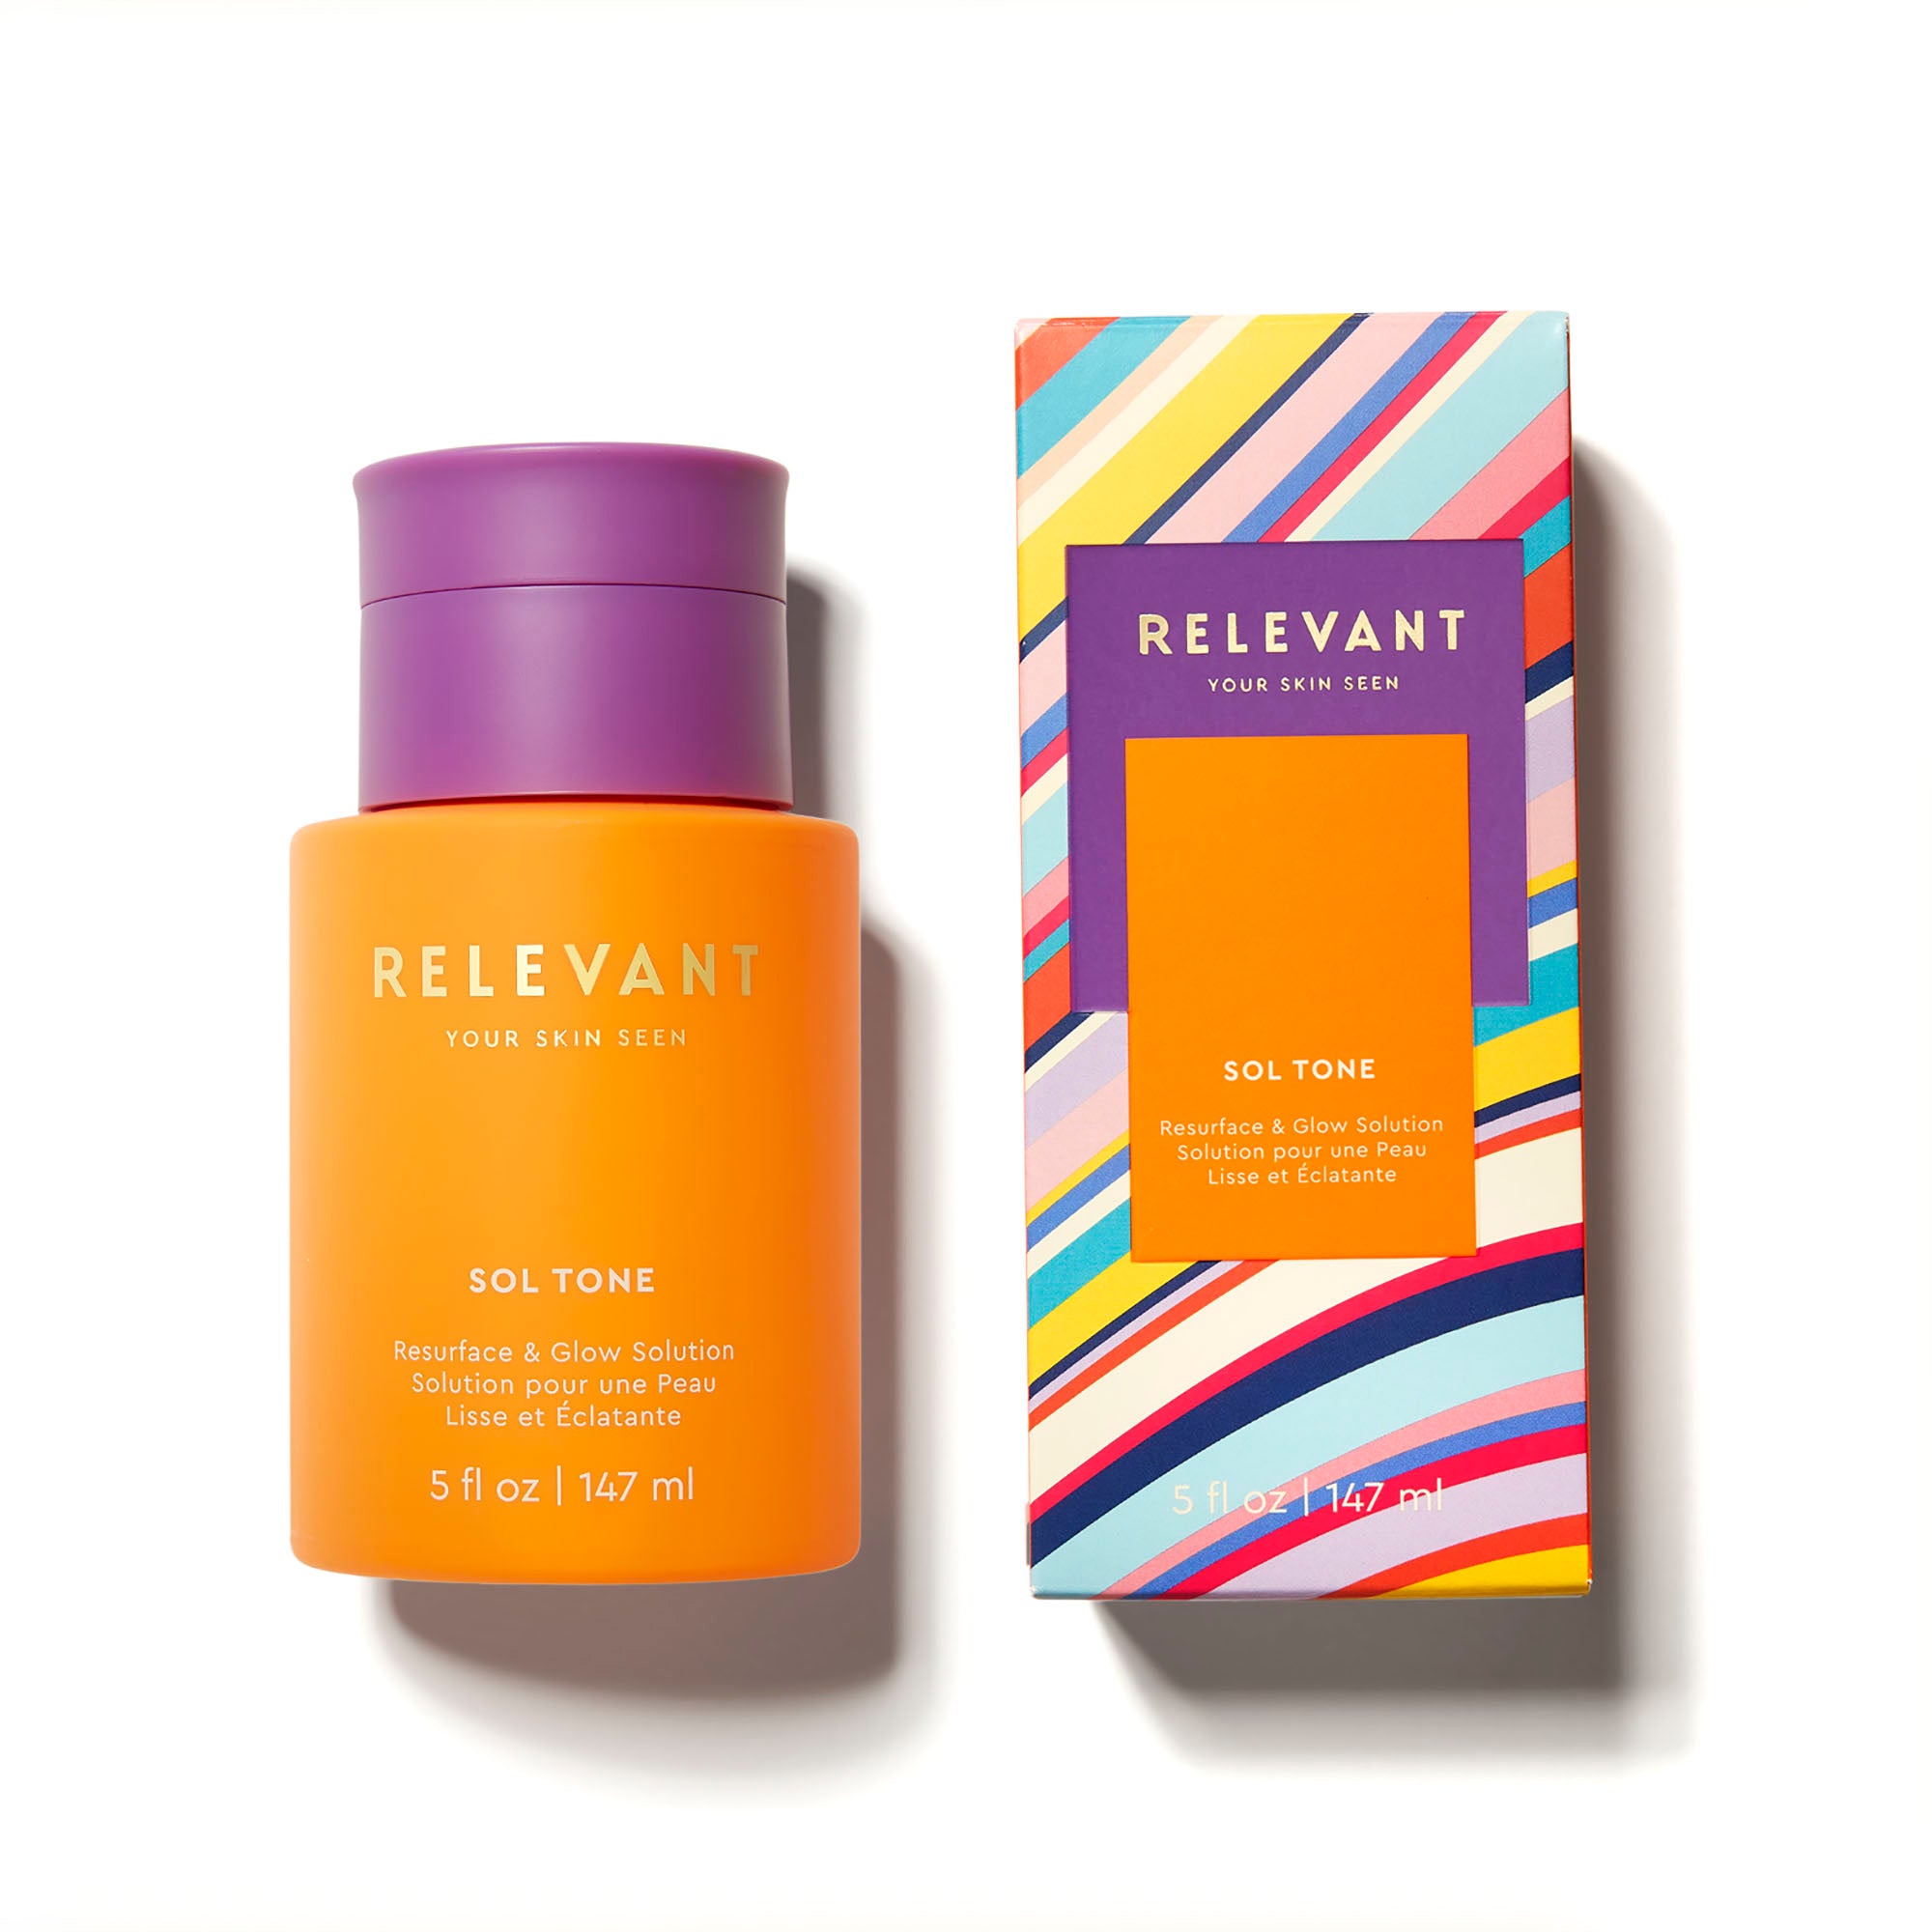 Relevant Your Skin Seen | Sol Tone Resurface Glow Solution – Relevant Skin